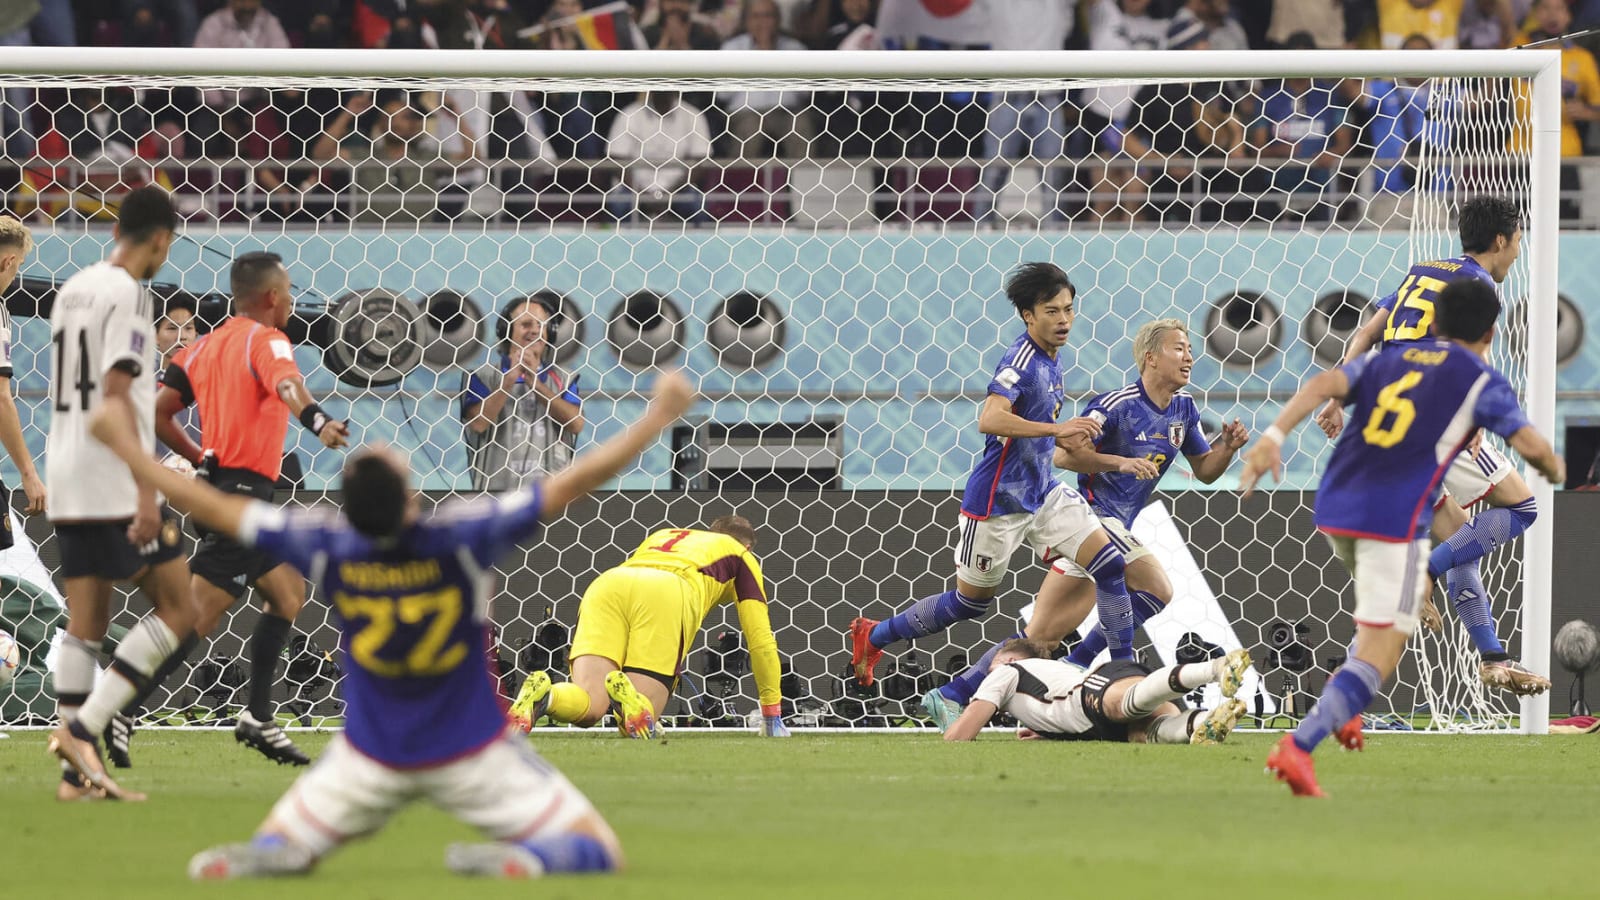 Japan's German connections pay off in stunning World Cup win